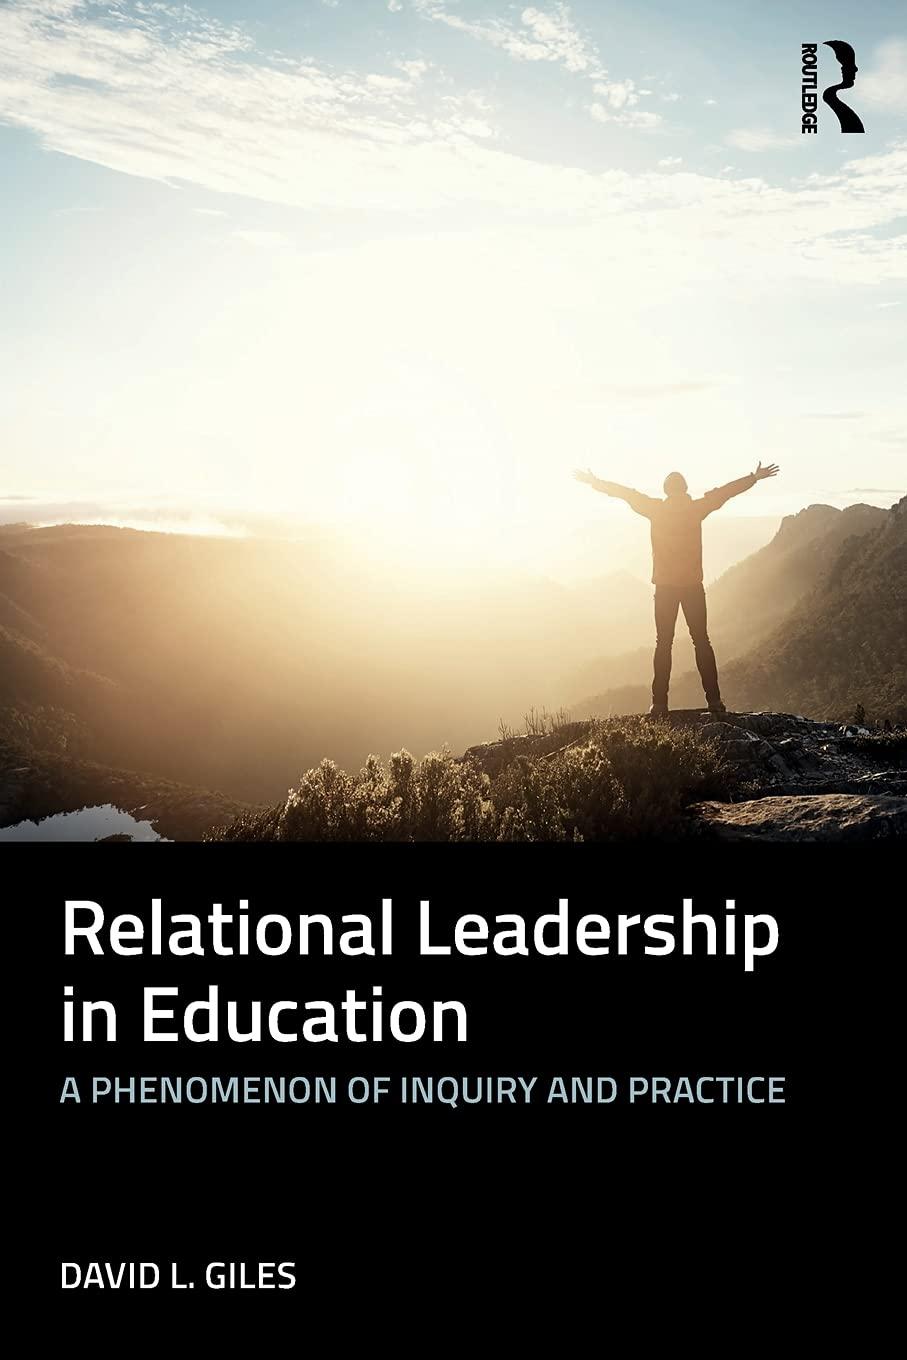 relational leadership in education: a phenomenon of inquiry and practice 1st edition david l. giles